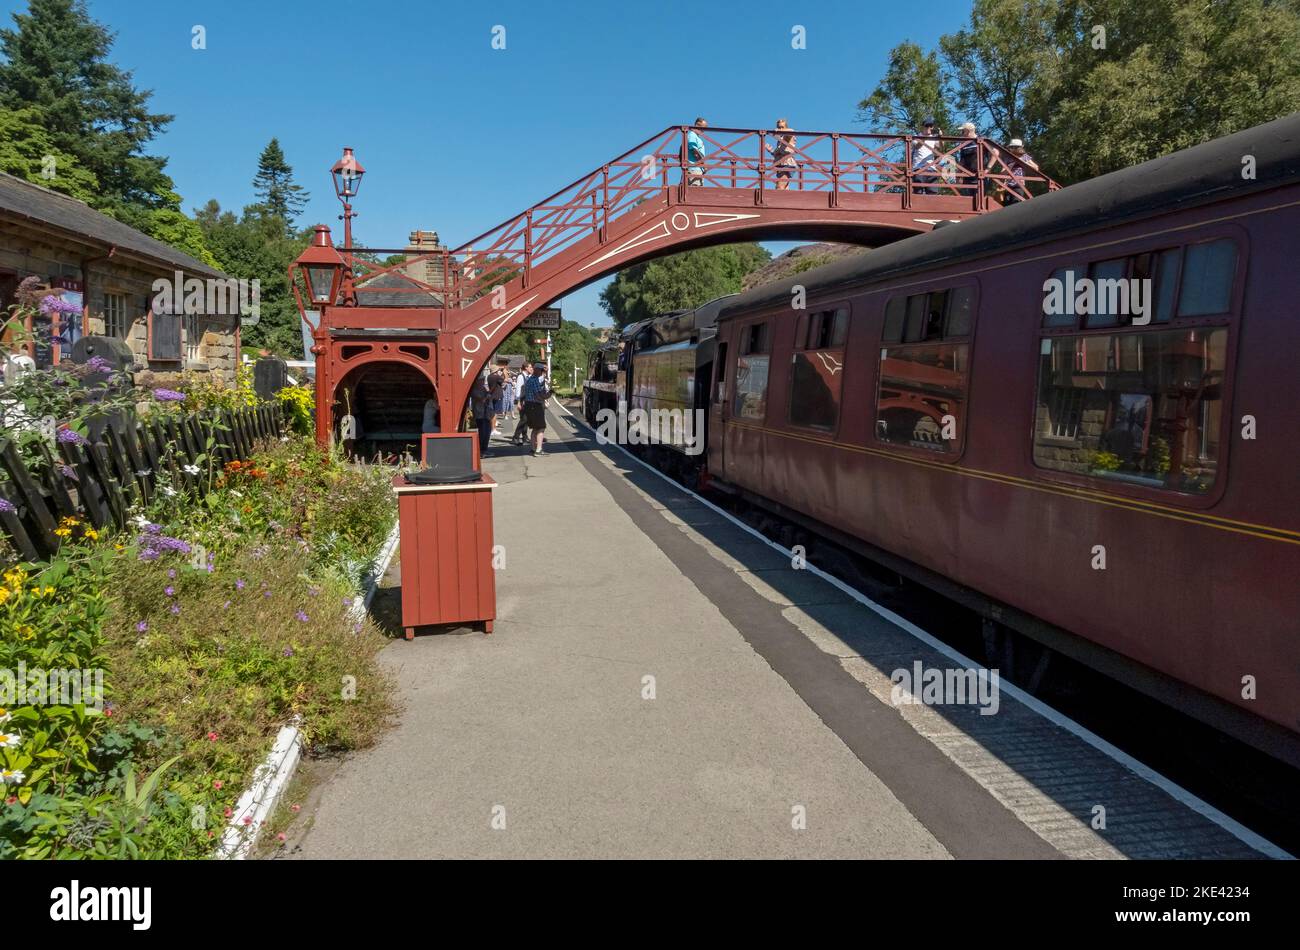 People tourists visitors on Goathland steam train station platform in summer North Yorkshire Moors Railway near Whitby North Yorkshire England UK Stock Photo